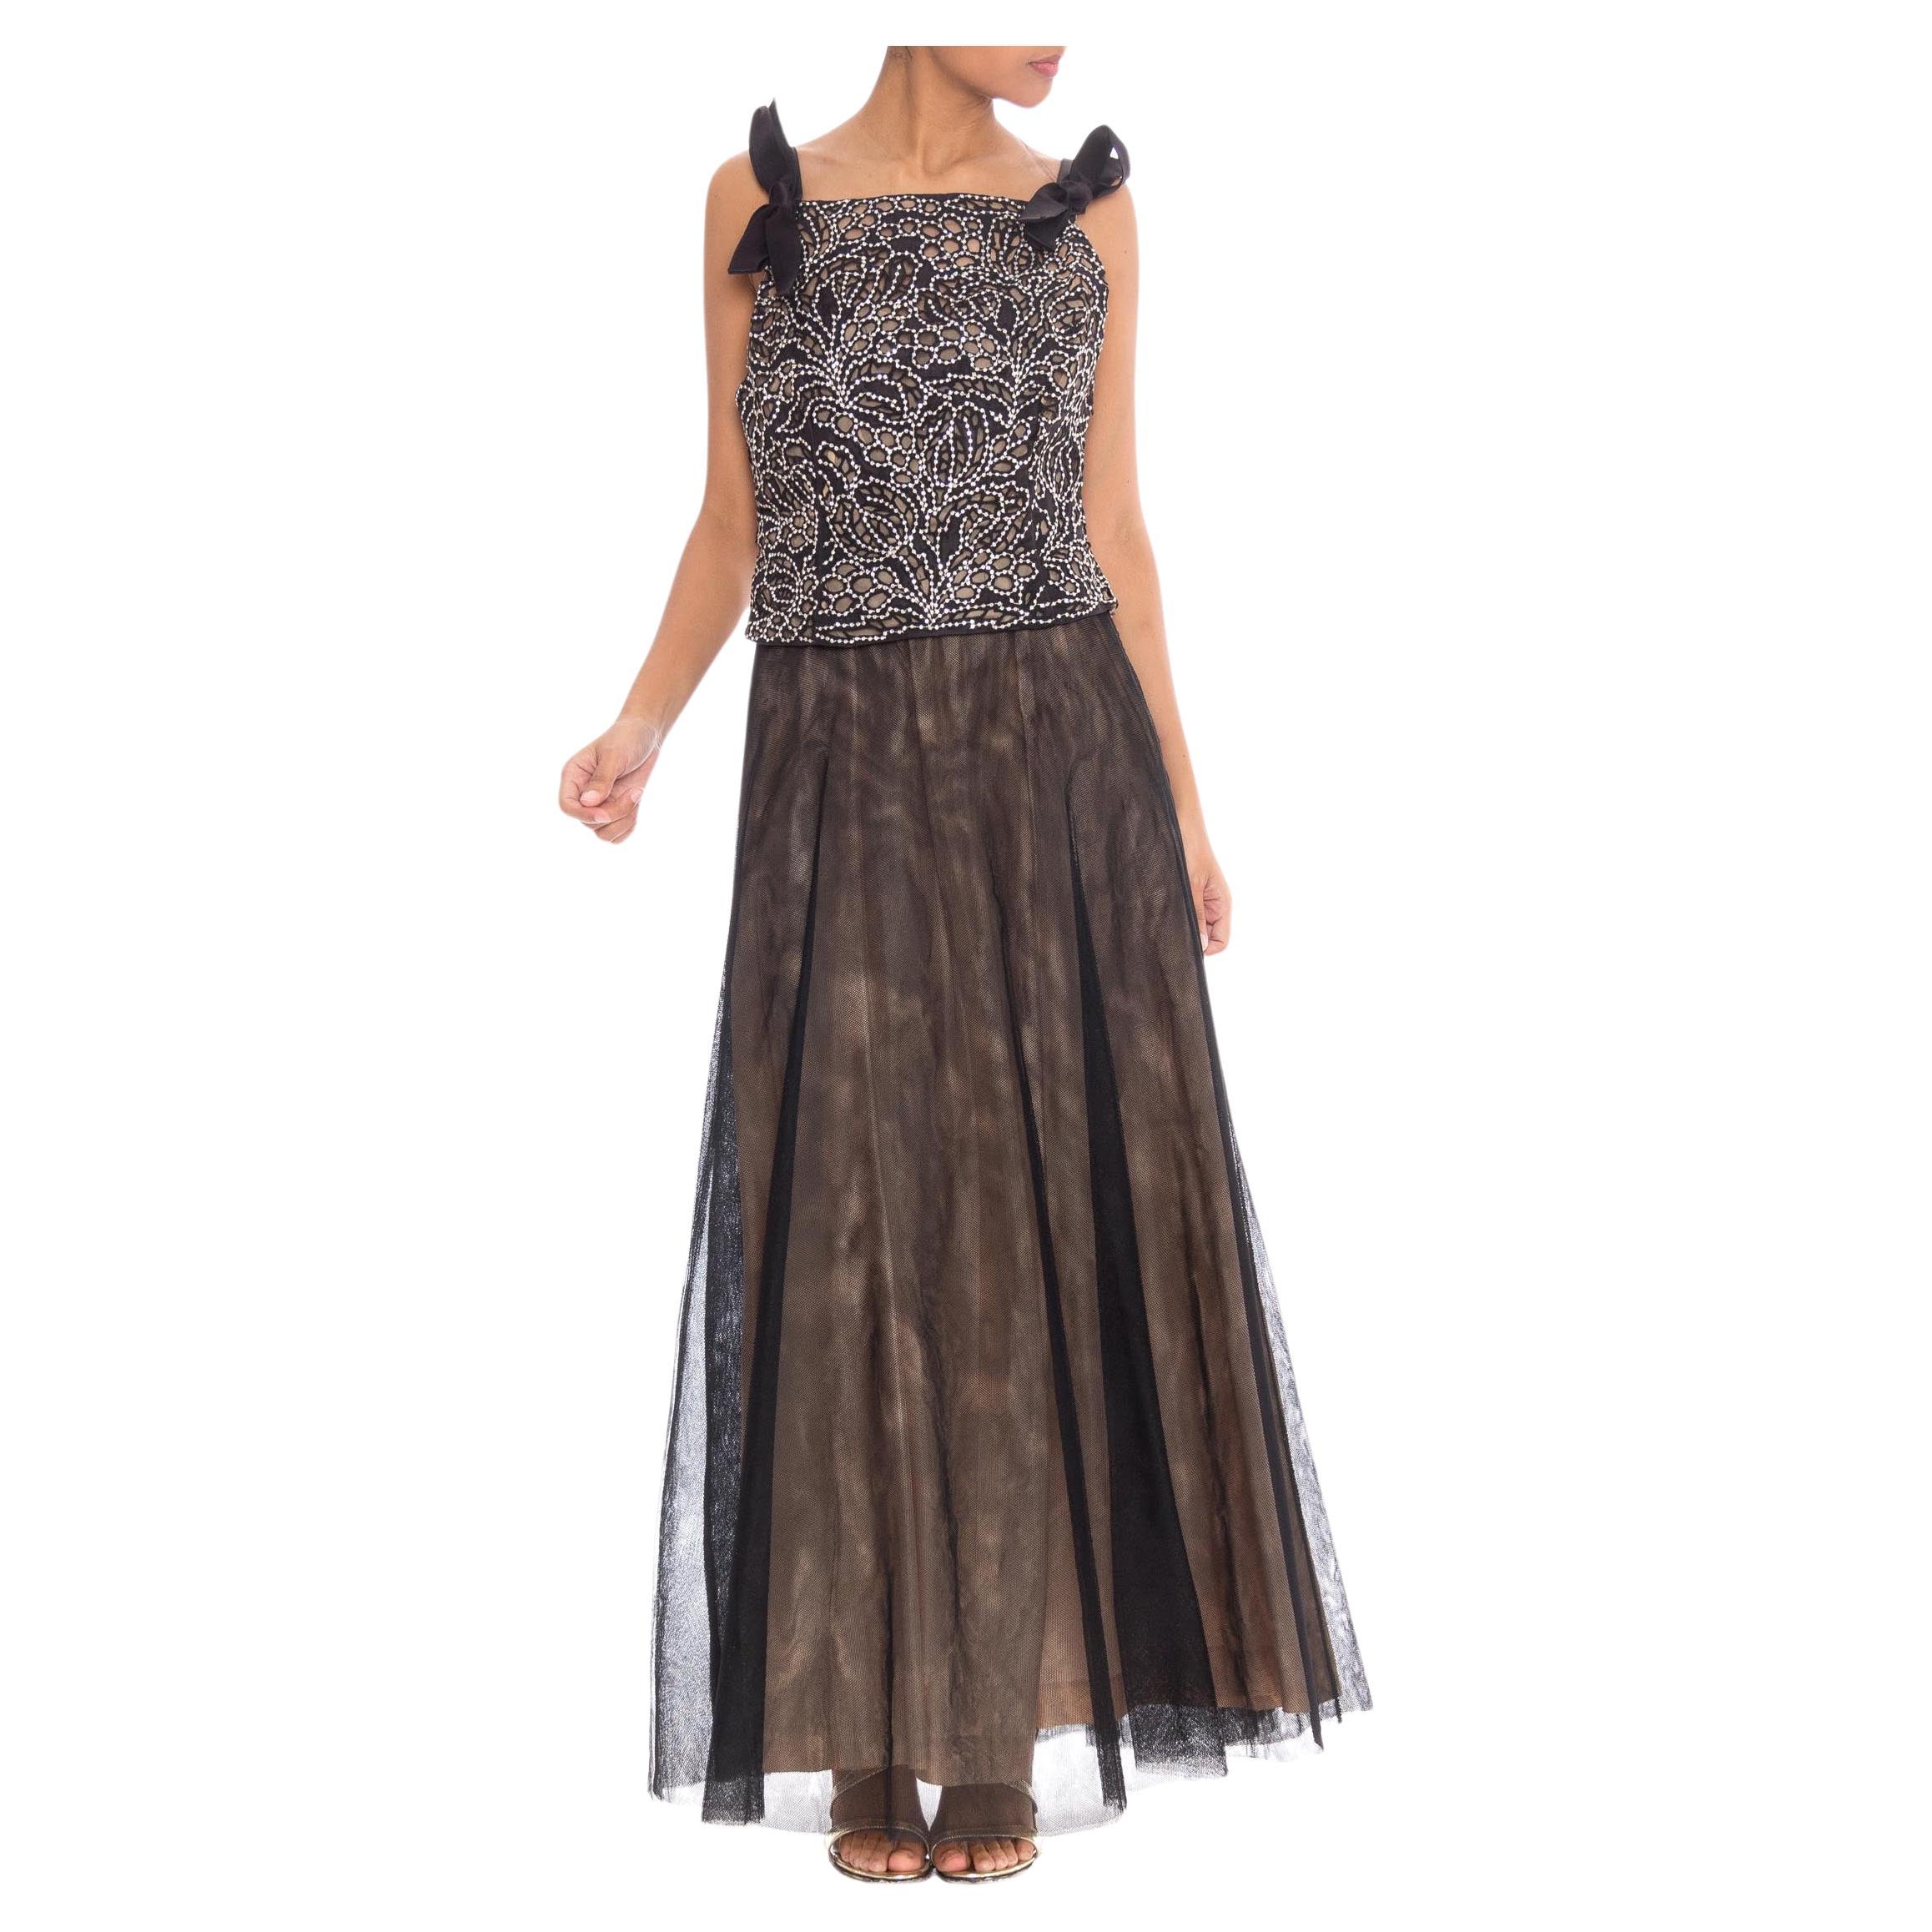 1980 VALENTINO Black Silk Tulle Couture Quality Gown With Lace And Crystal Bodi For Sale